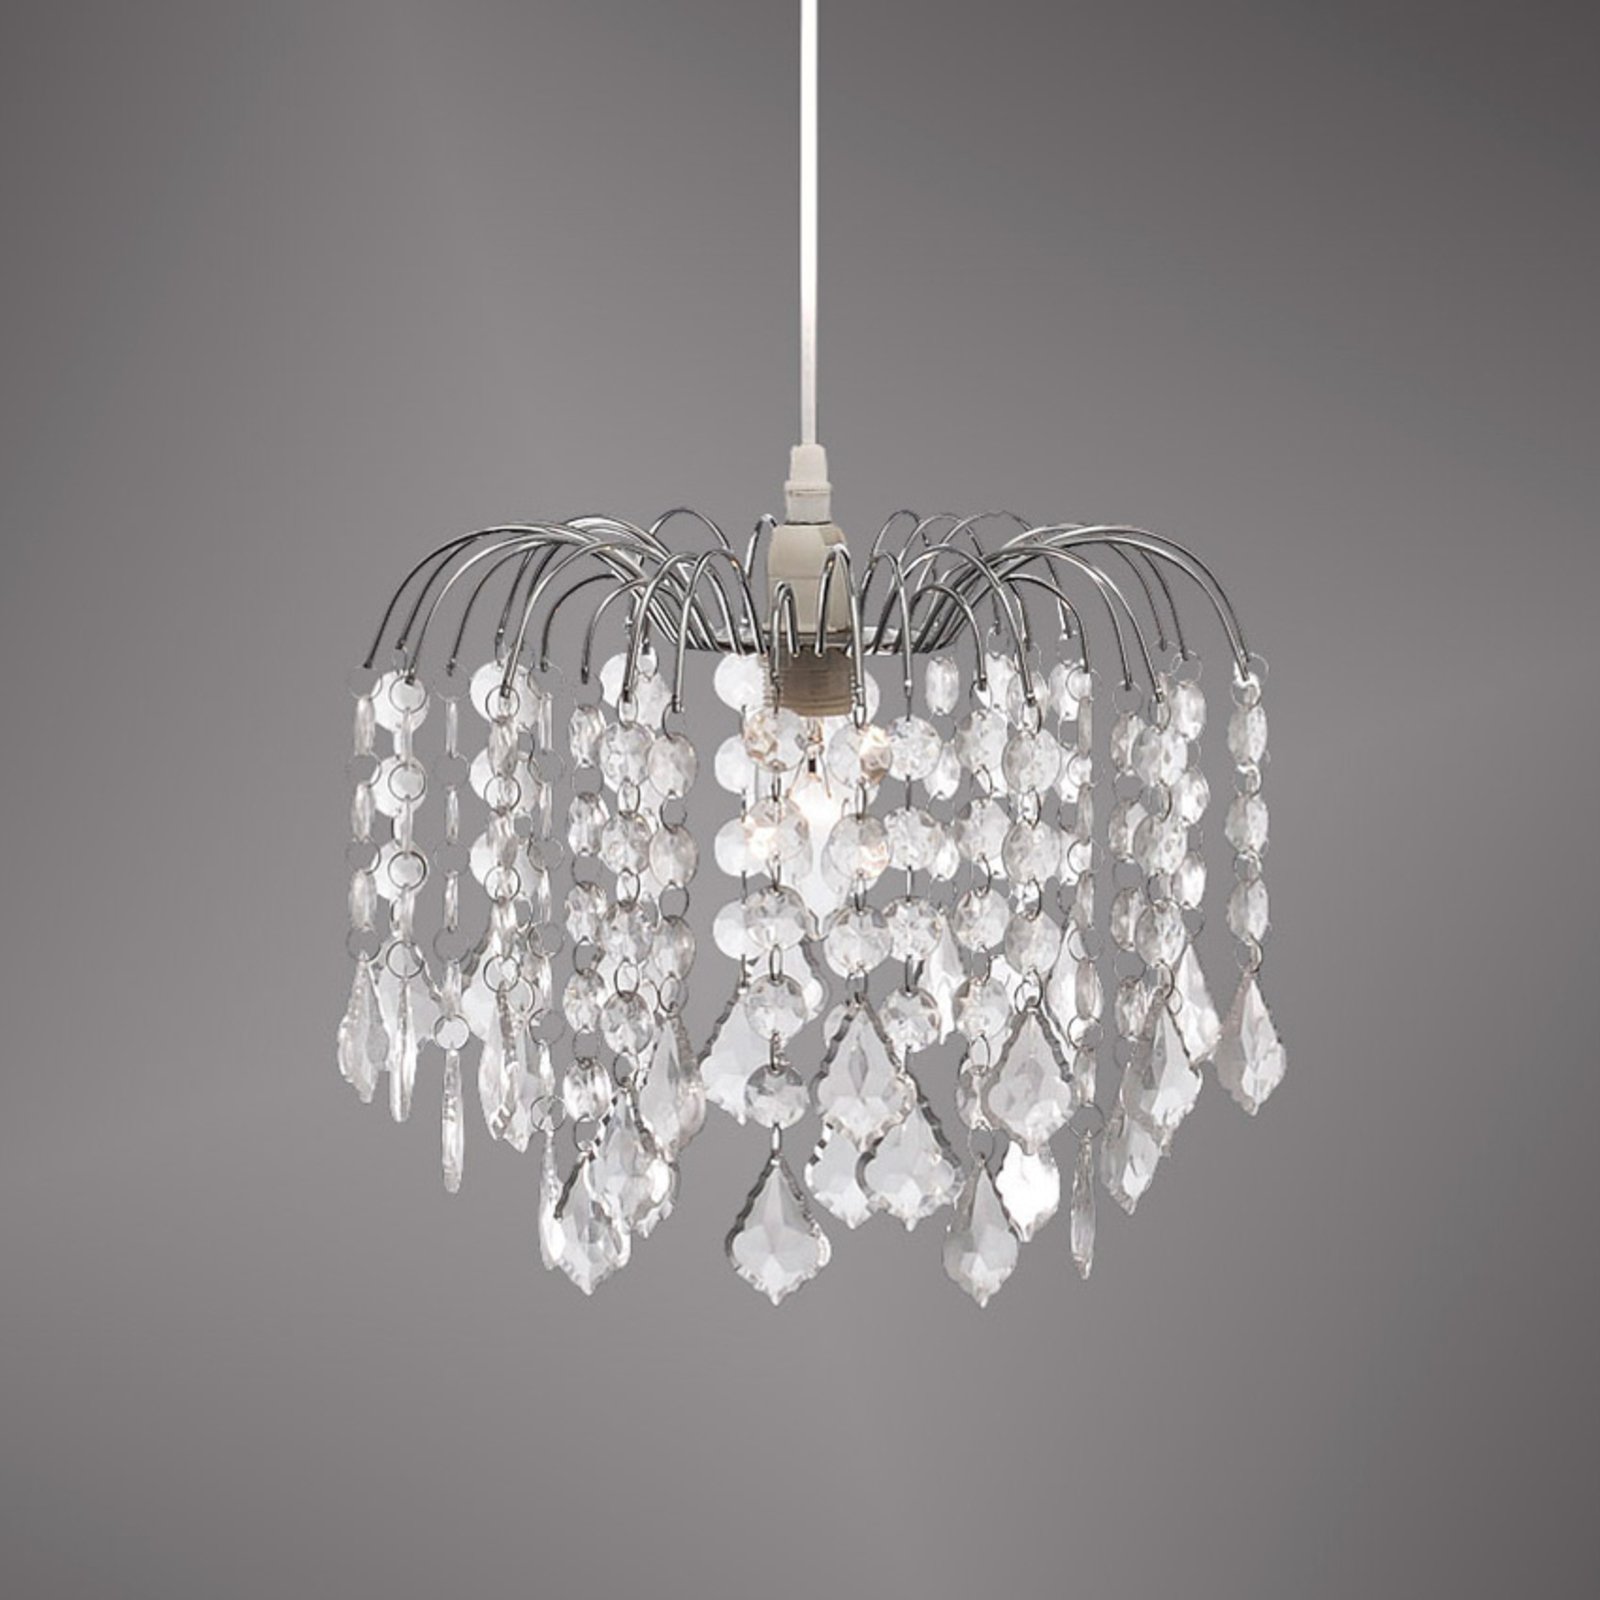 Jelly hanging light with clear decorative elements